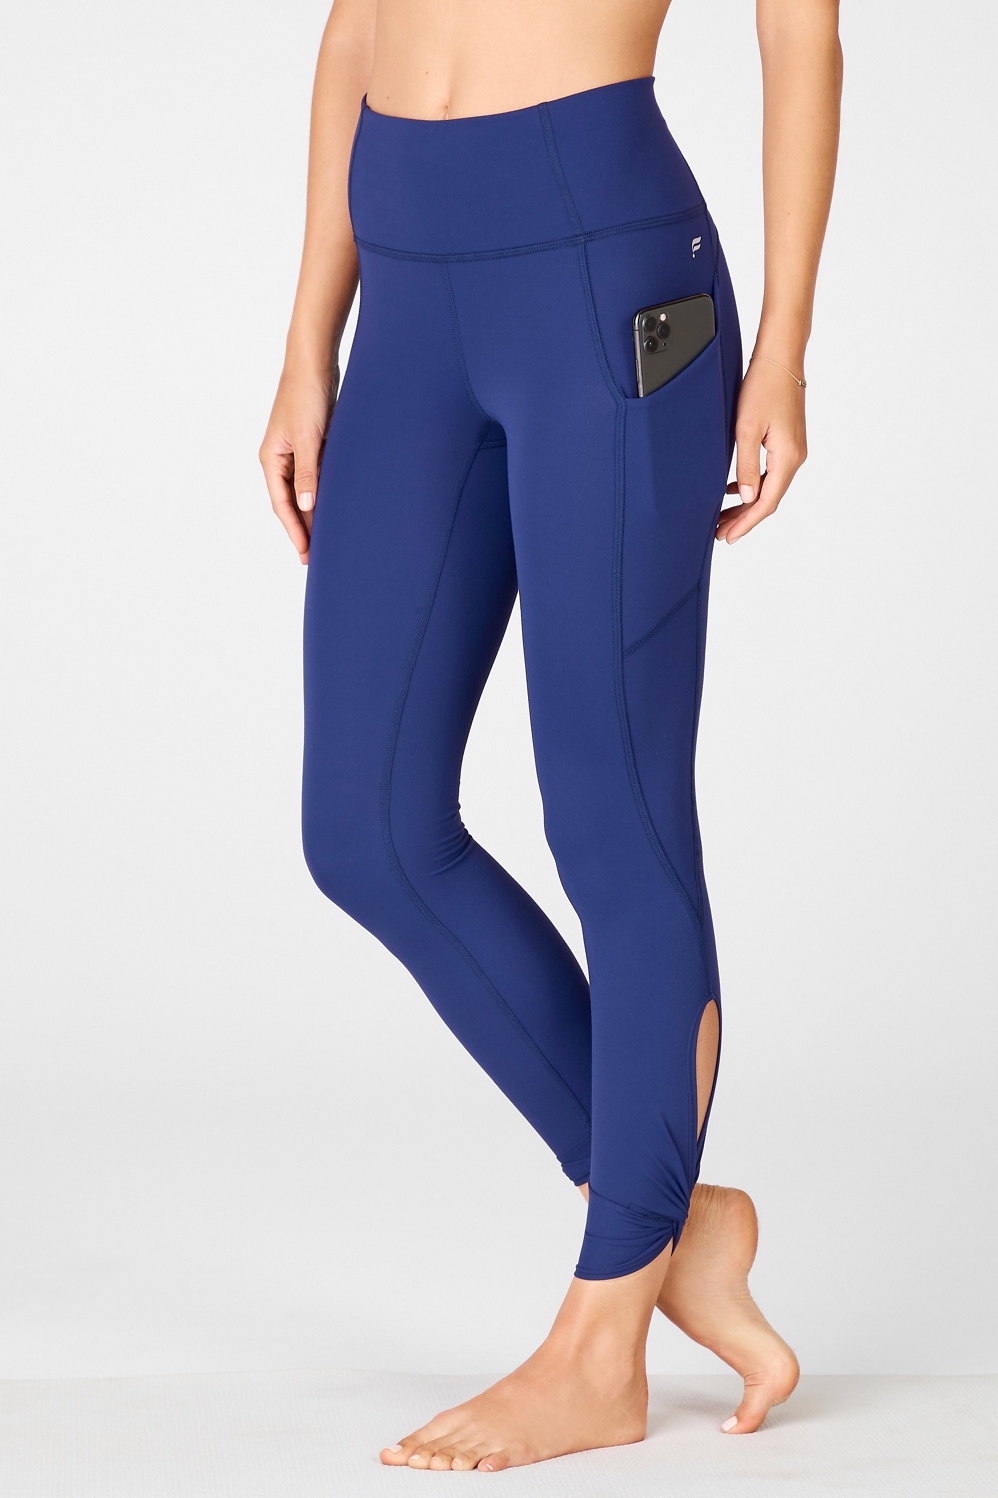 Oasis PureLuxe High-Waisted Twist 7/8 Legging - Fabletics Canada